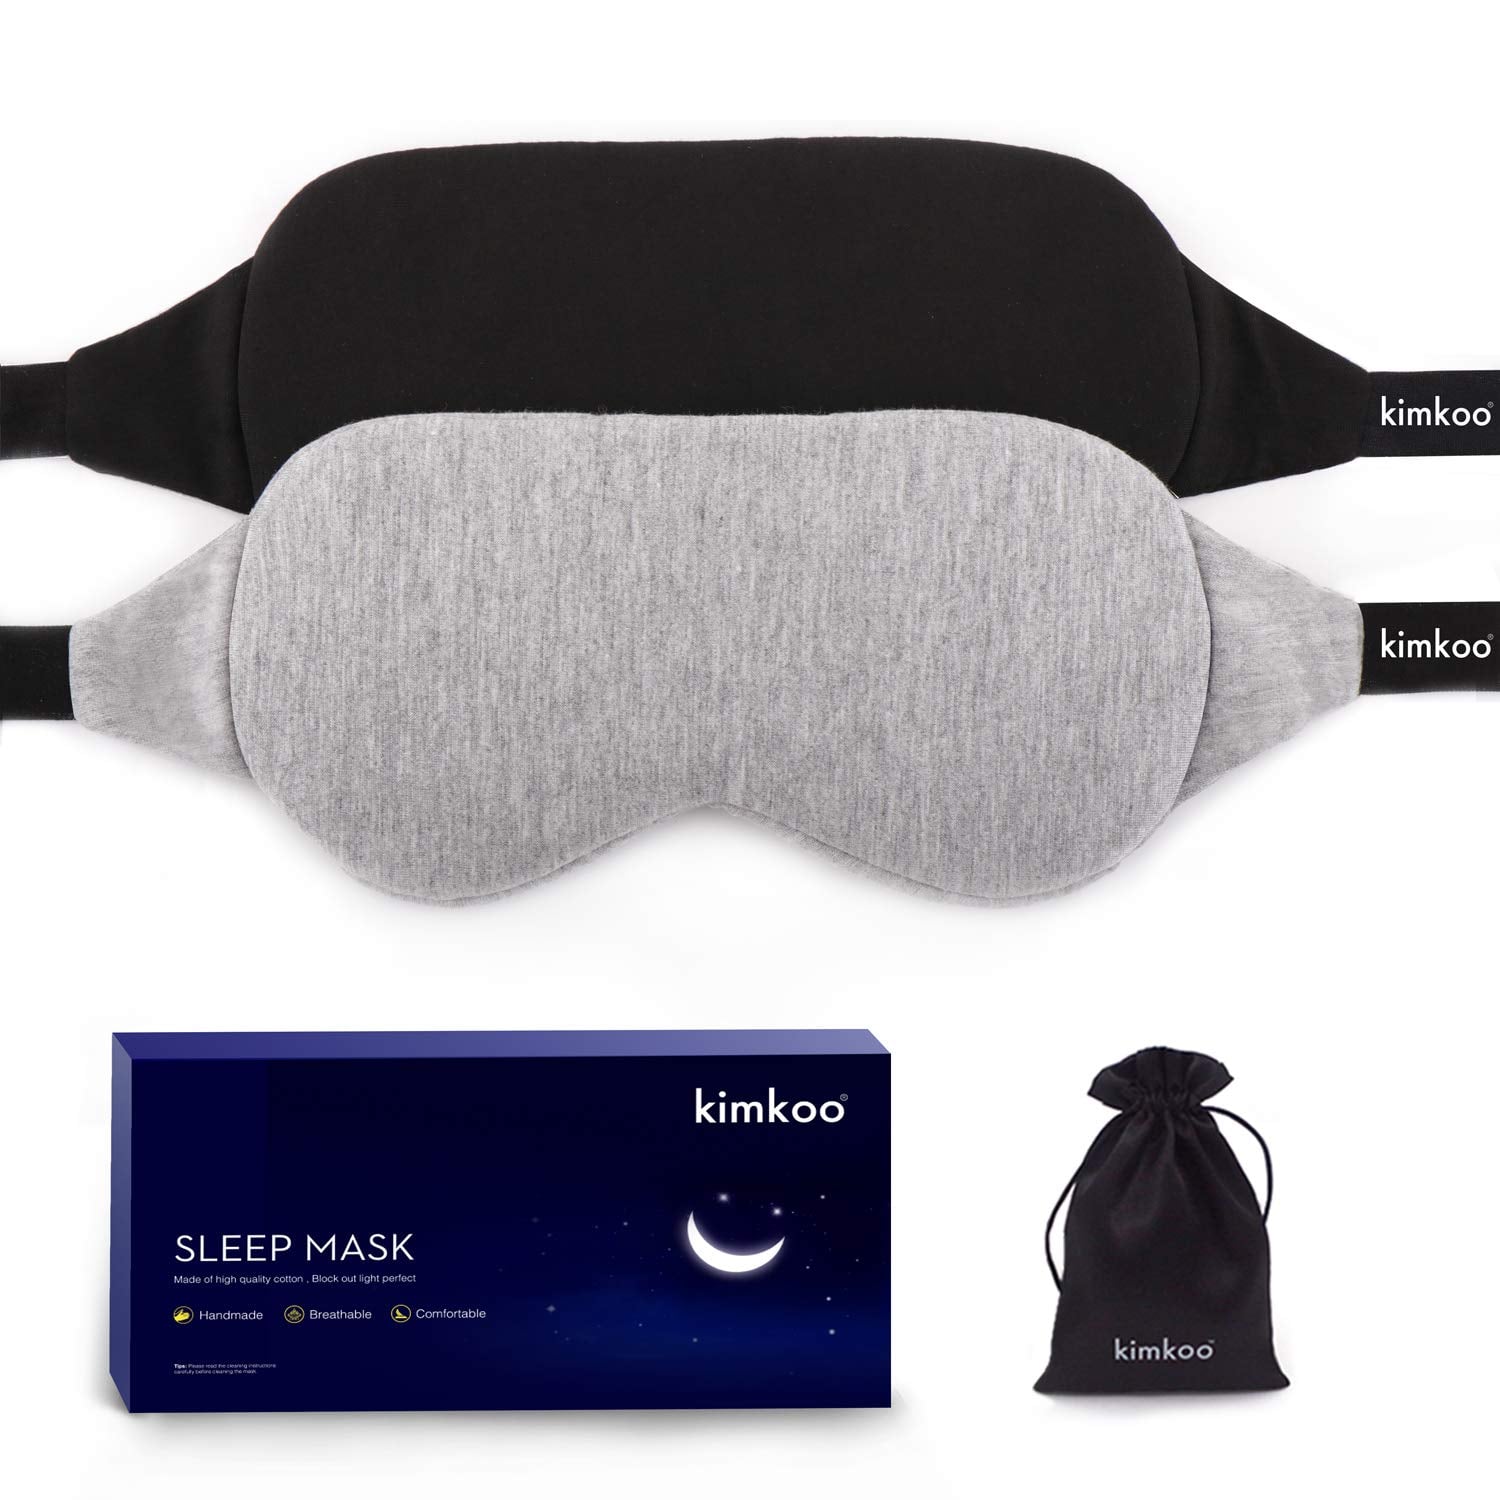 <p><a href="https://www.amazon.com/Mask-Sleeping-Perfectly-Comfortable-Blindfold-Travelling/dp/B07QHT221R">BUY NOW</a></p><p>$10</p><p><a href="https://www.amazon.com/Mask-Sleeping-Perfectly-Comfortable-Blindfold-Travelling/dp/B07QHT221R" class="ga-track"><strong>Kimkoo Cotton Sleep Mask</strong></a> ($10, originally $15)</p> <p>Block sunlight from getting in the way of your afternoon nap with a sleep mask. This soft option is a great deal, and comes with a travel pouch.</p>